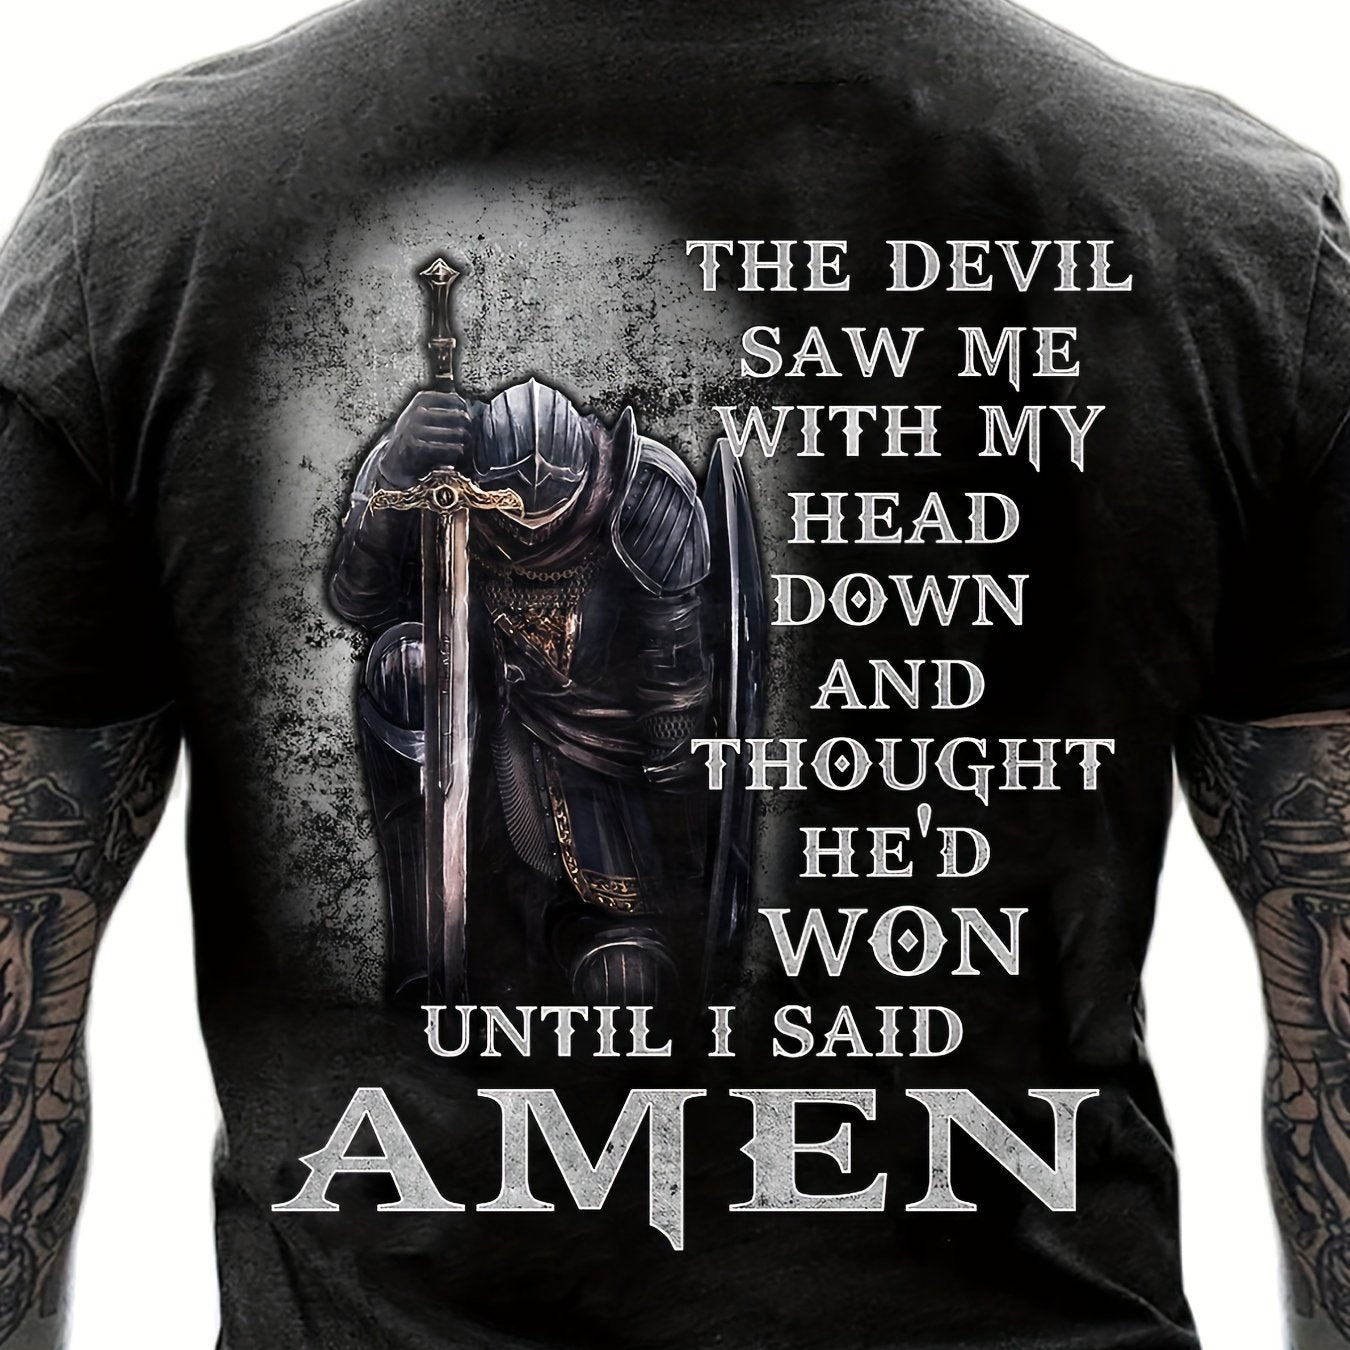 'Until I Said Amen' God Jesus Print T Shirt, Tees For Men, Casual Short Sleeve Tshirt For Summer Spring Fall, Tops As Gifts